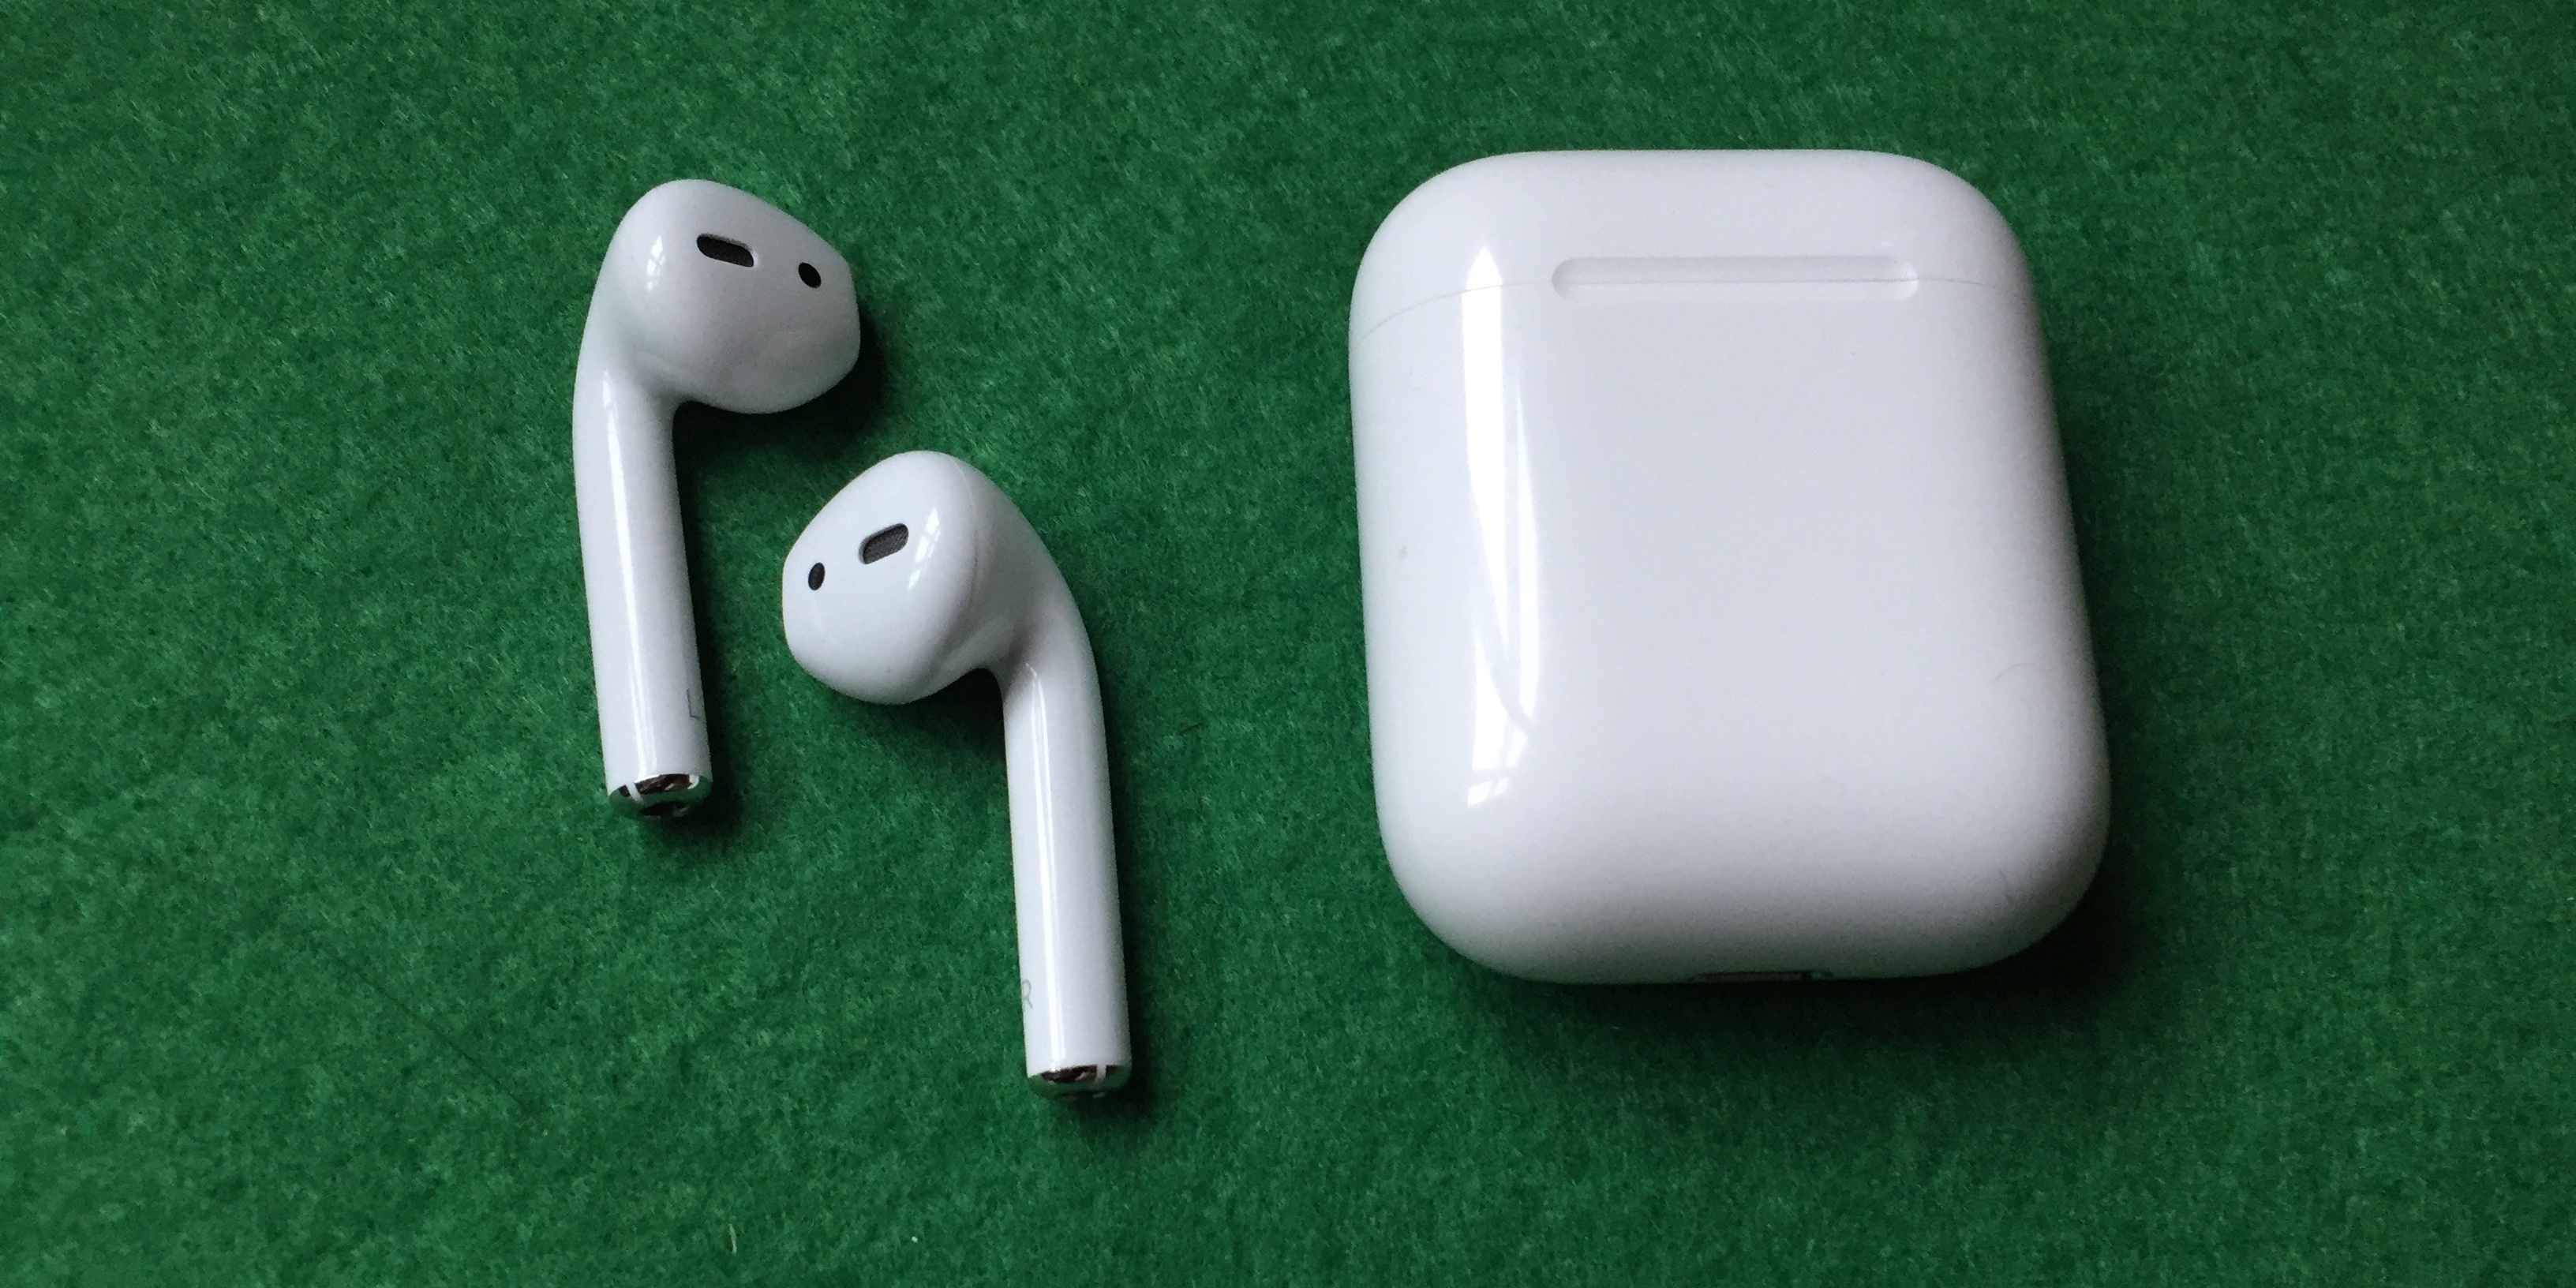 beruset mistet hjerte Mars Hands-on review: Apple AirPods sound quality, pairing, auto-pause, Siri and  more - 9to5Mac